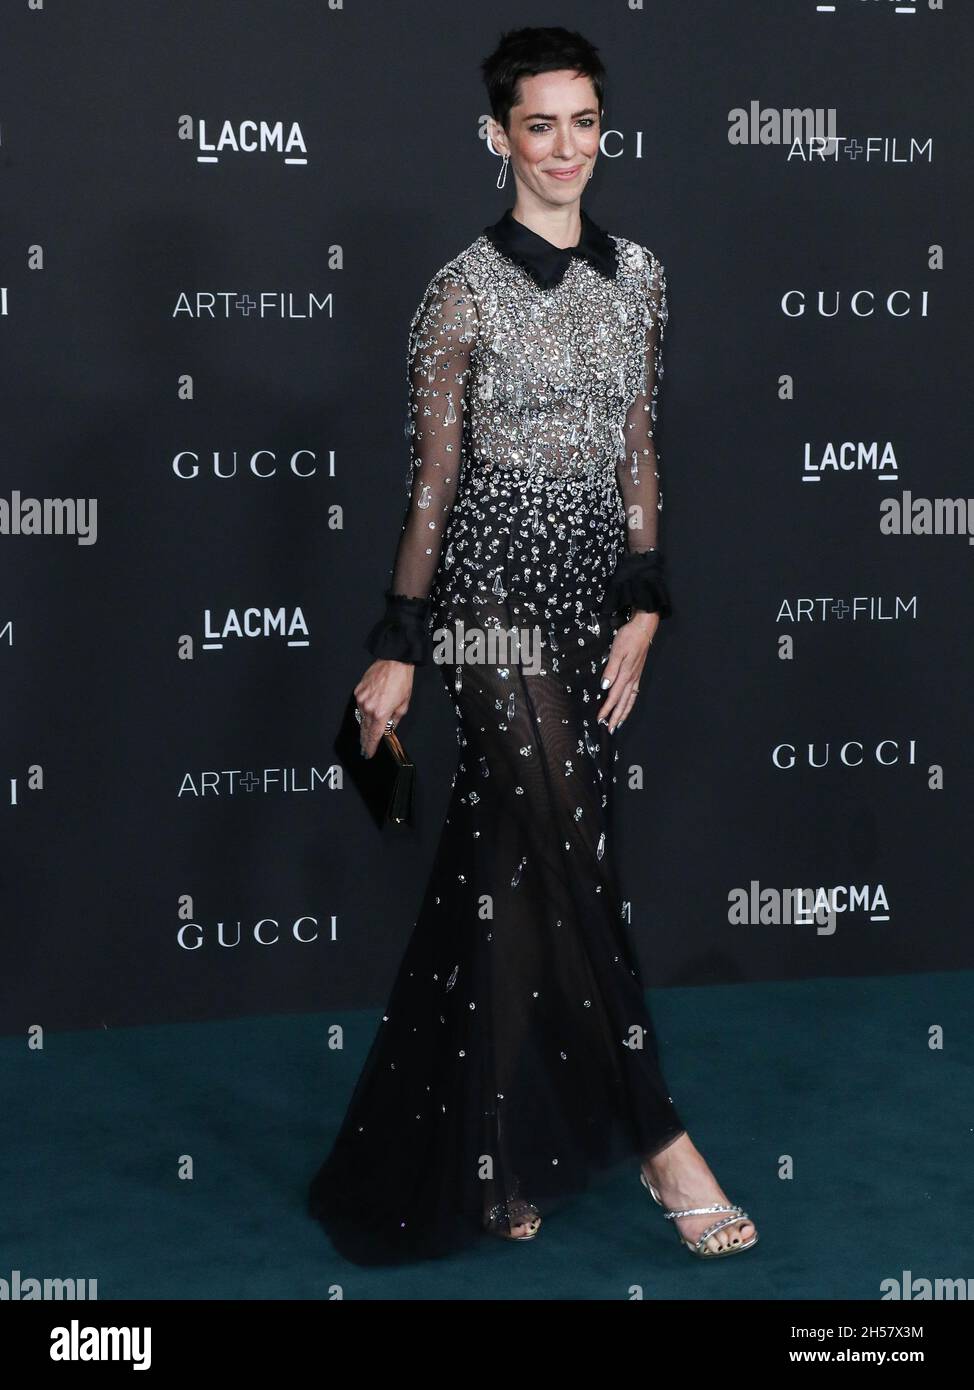 LOS ANGELES, CALIFORNIA, USA - NOVEMBER 06: Actress Rebecca Hall wearing a Miu Miu dress arrives at the 10th Annual LACMA Art + Film Gala 2021 held at the Los Angeles County Museum of Art on November 6, 2021 in Los Angeles, California, United States. (Photo by Xavier Collin/Image Press Agency/Sipa USA) Stock Photo